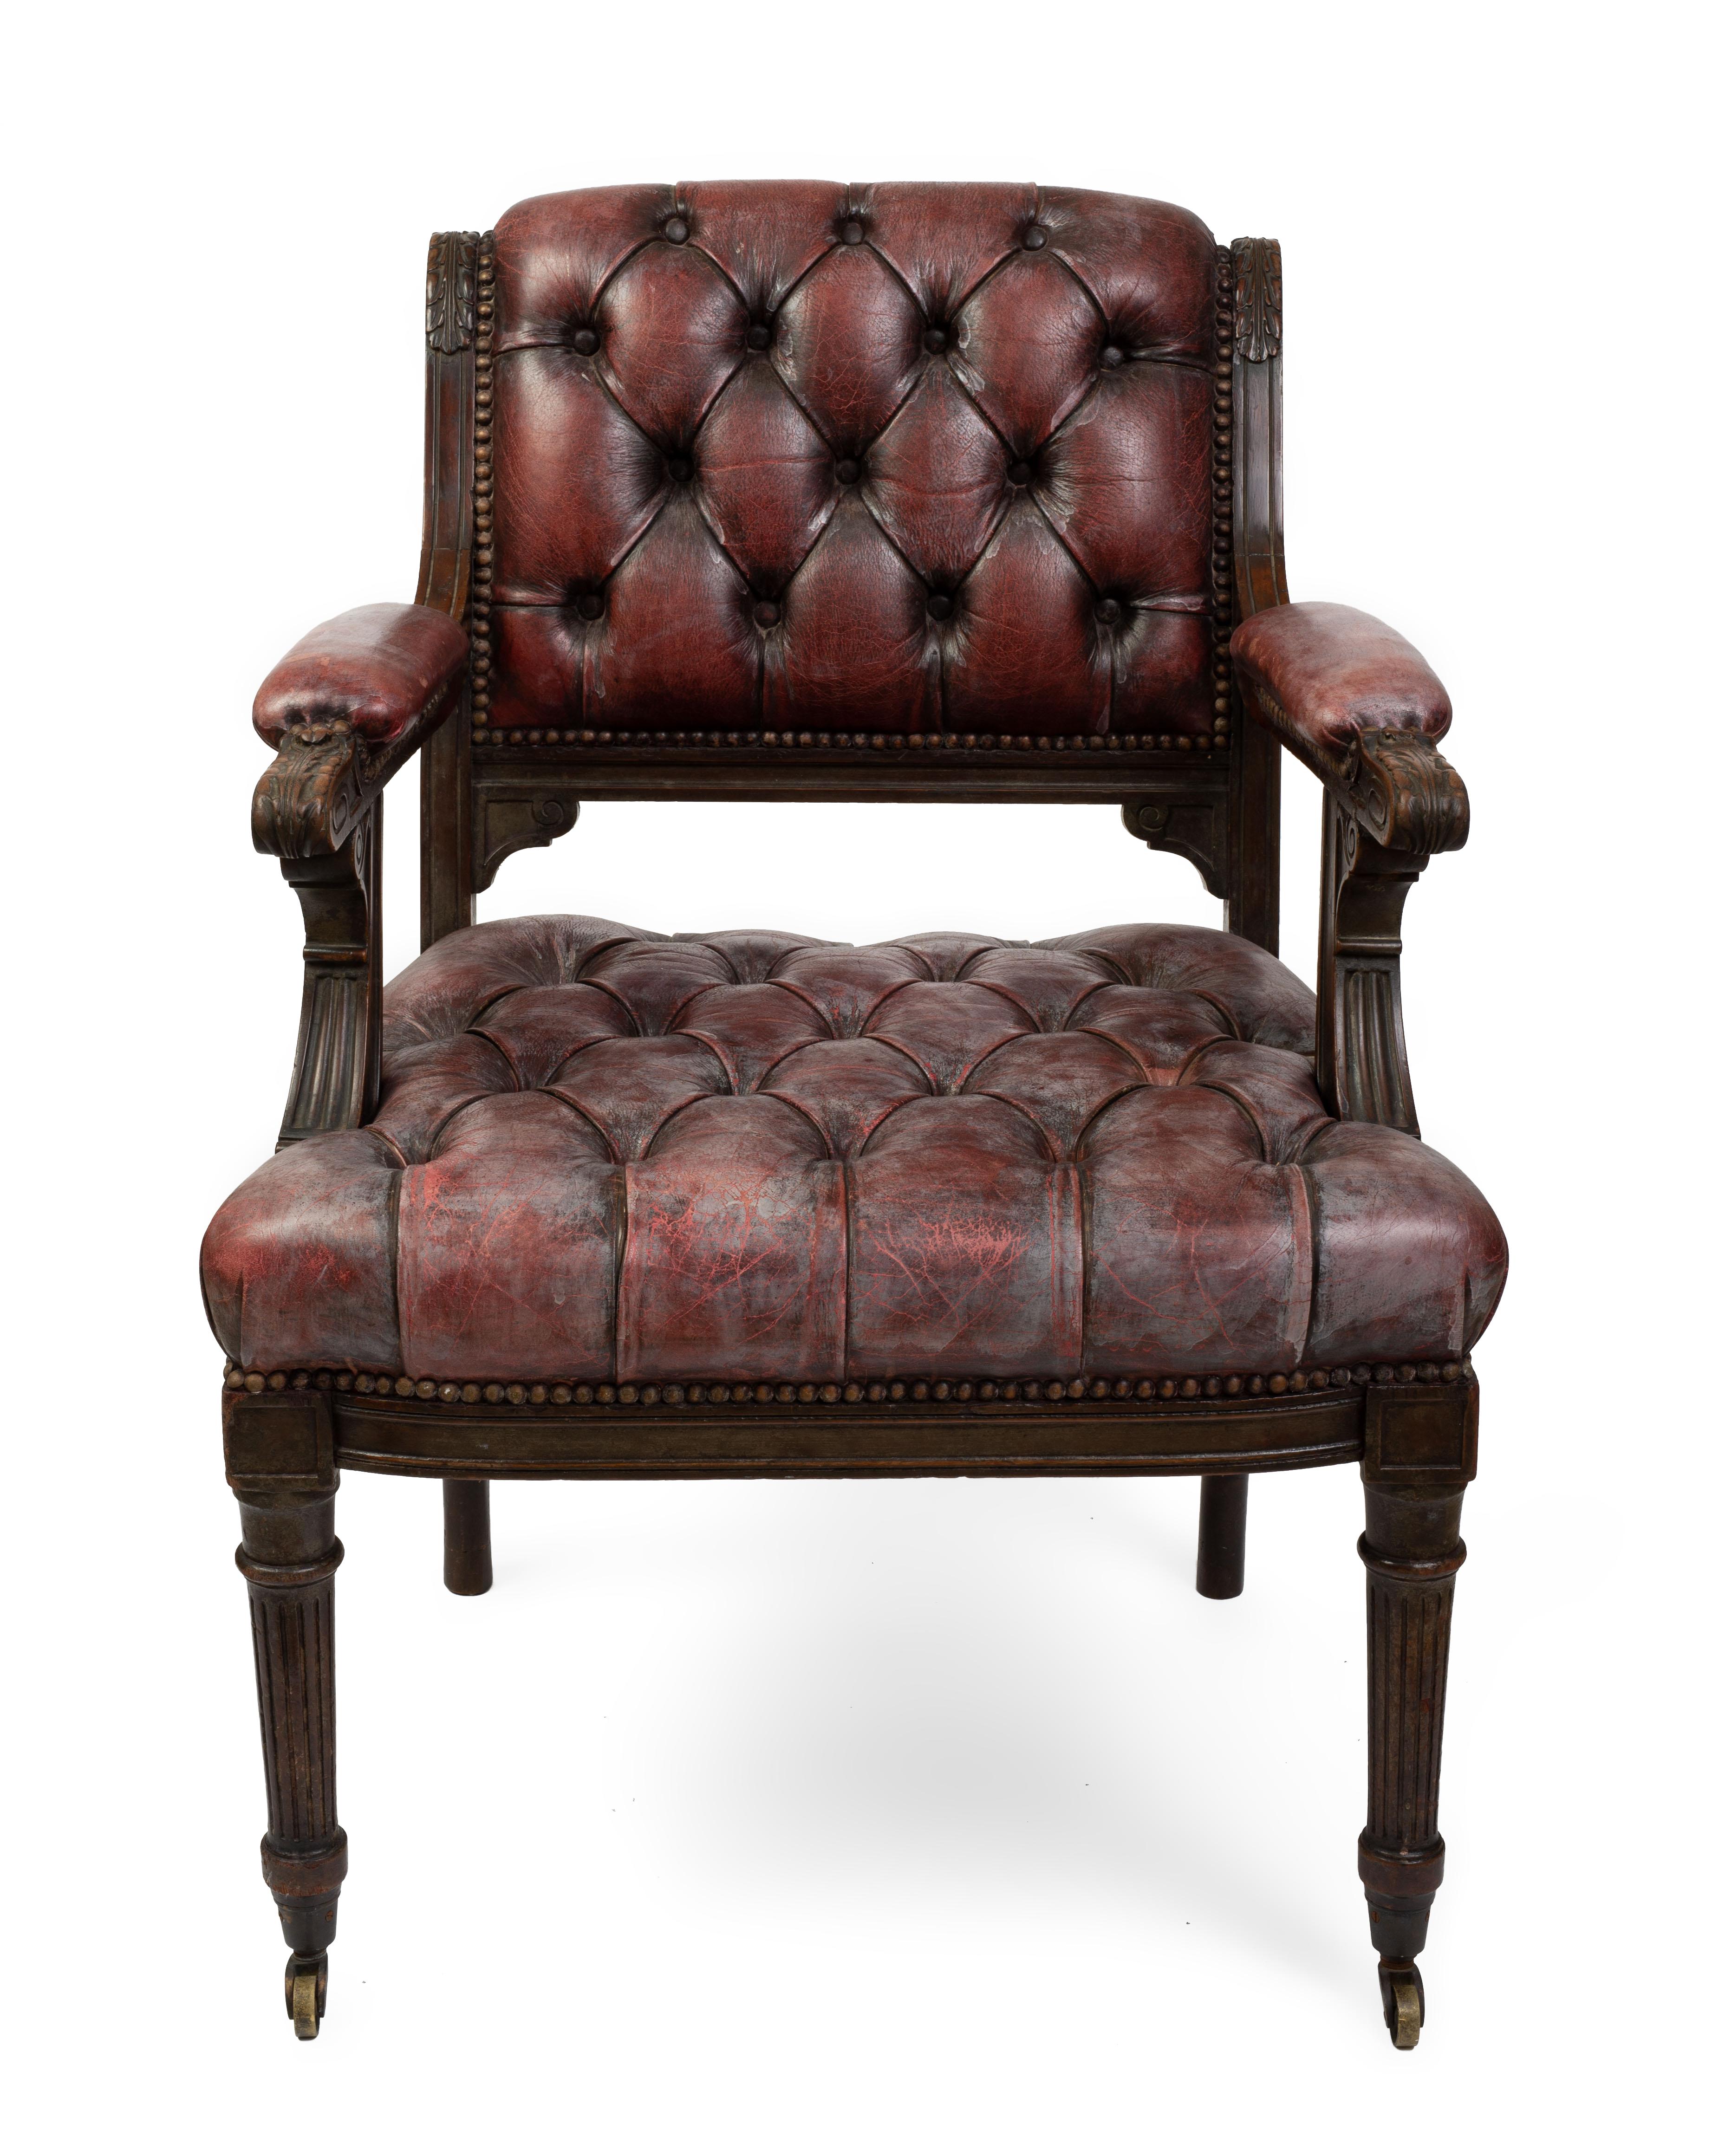 Each with a scrolled back, arms and seat with tufted upholstery, carved with acanthus leaves and Greek keys, raised on front fluted tapering legs ending in casters.